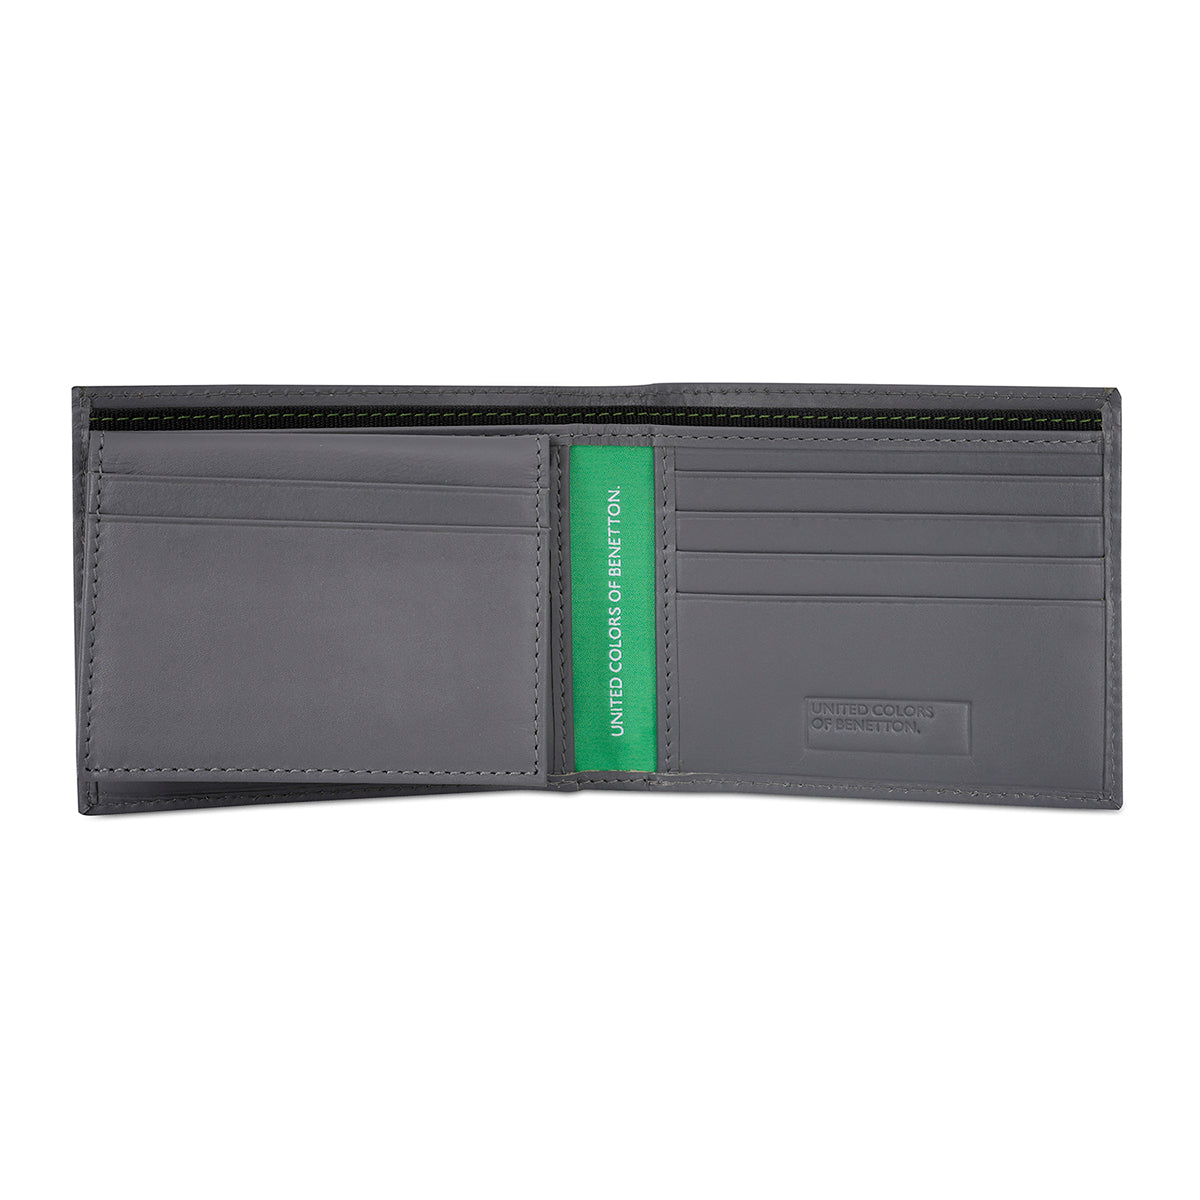 United Colors of Benetton Quinell Passcase Wallet grey